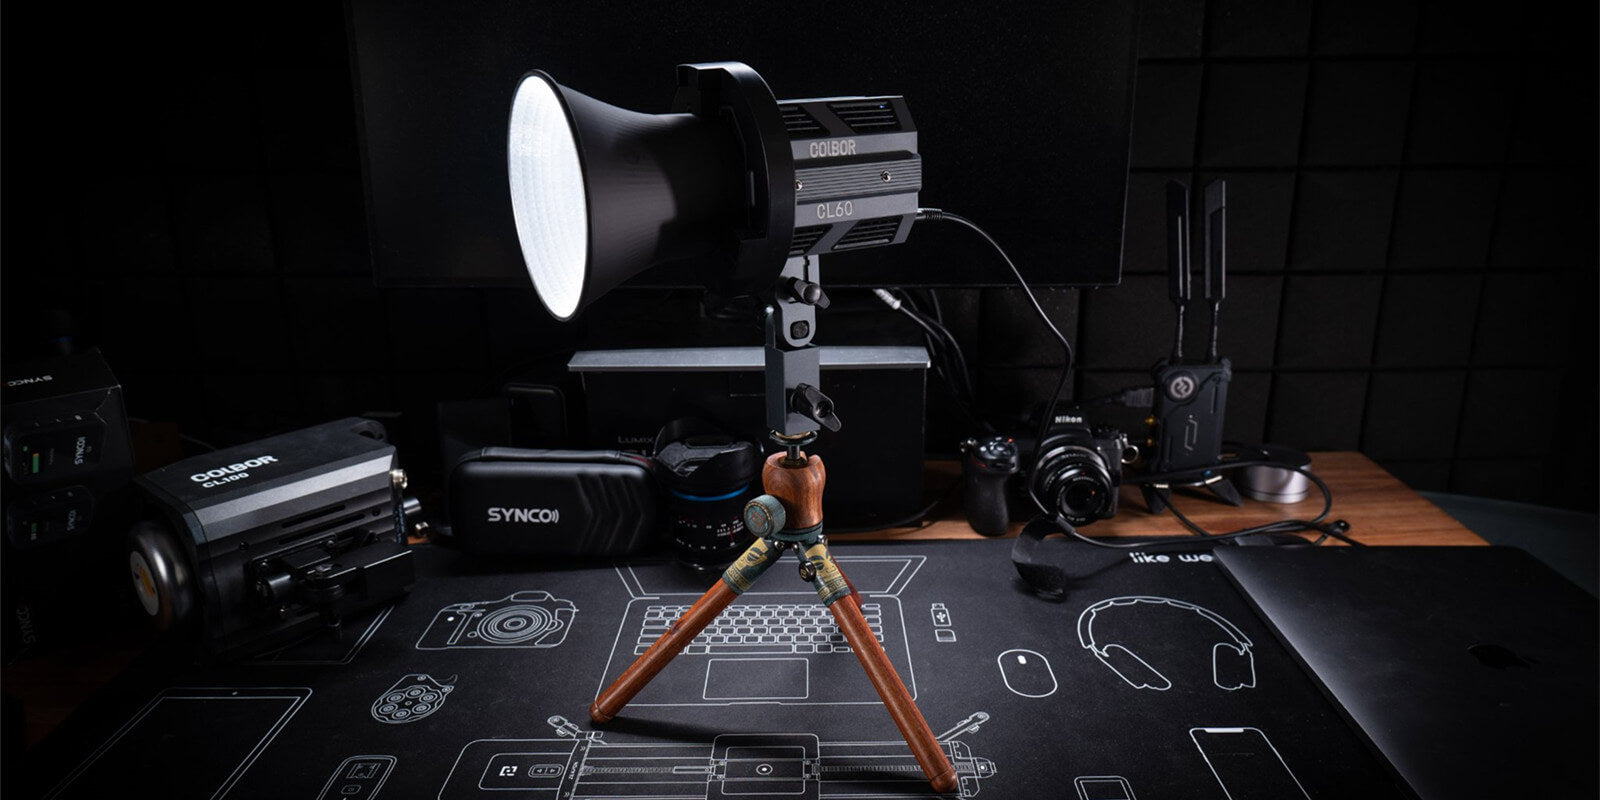 COLBOR CL60 best studio light for video is mounted on a light stand and placed on the table.